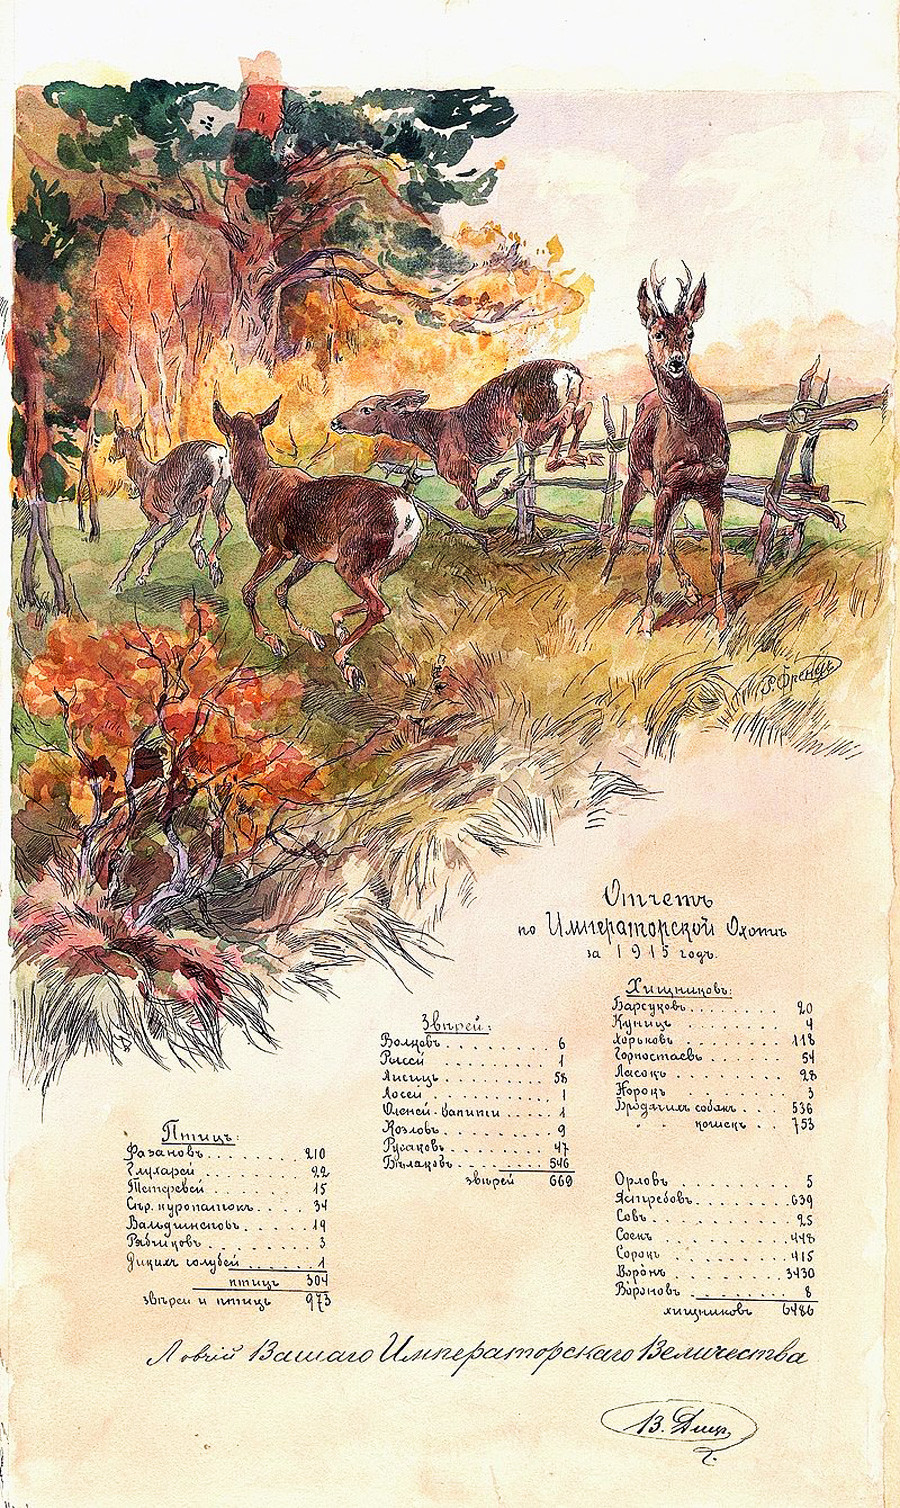 A watercolor showing the results of a royal hunt, 1915